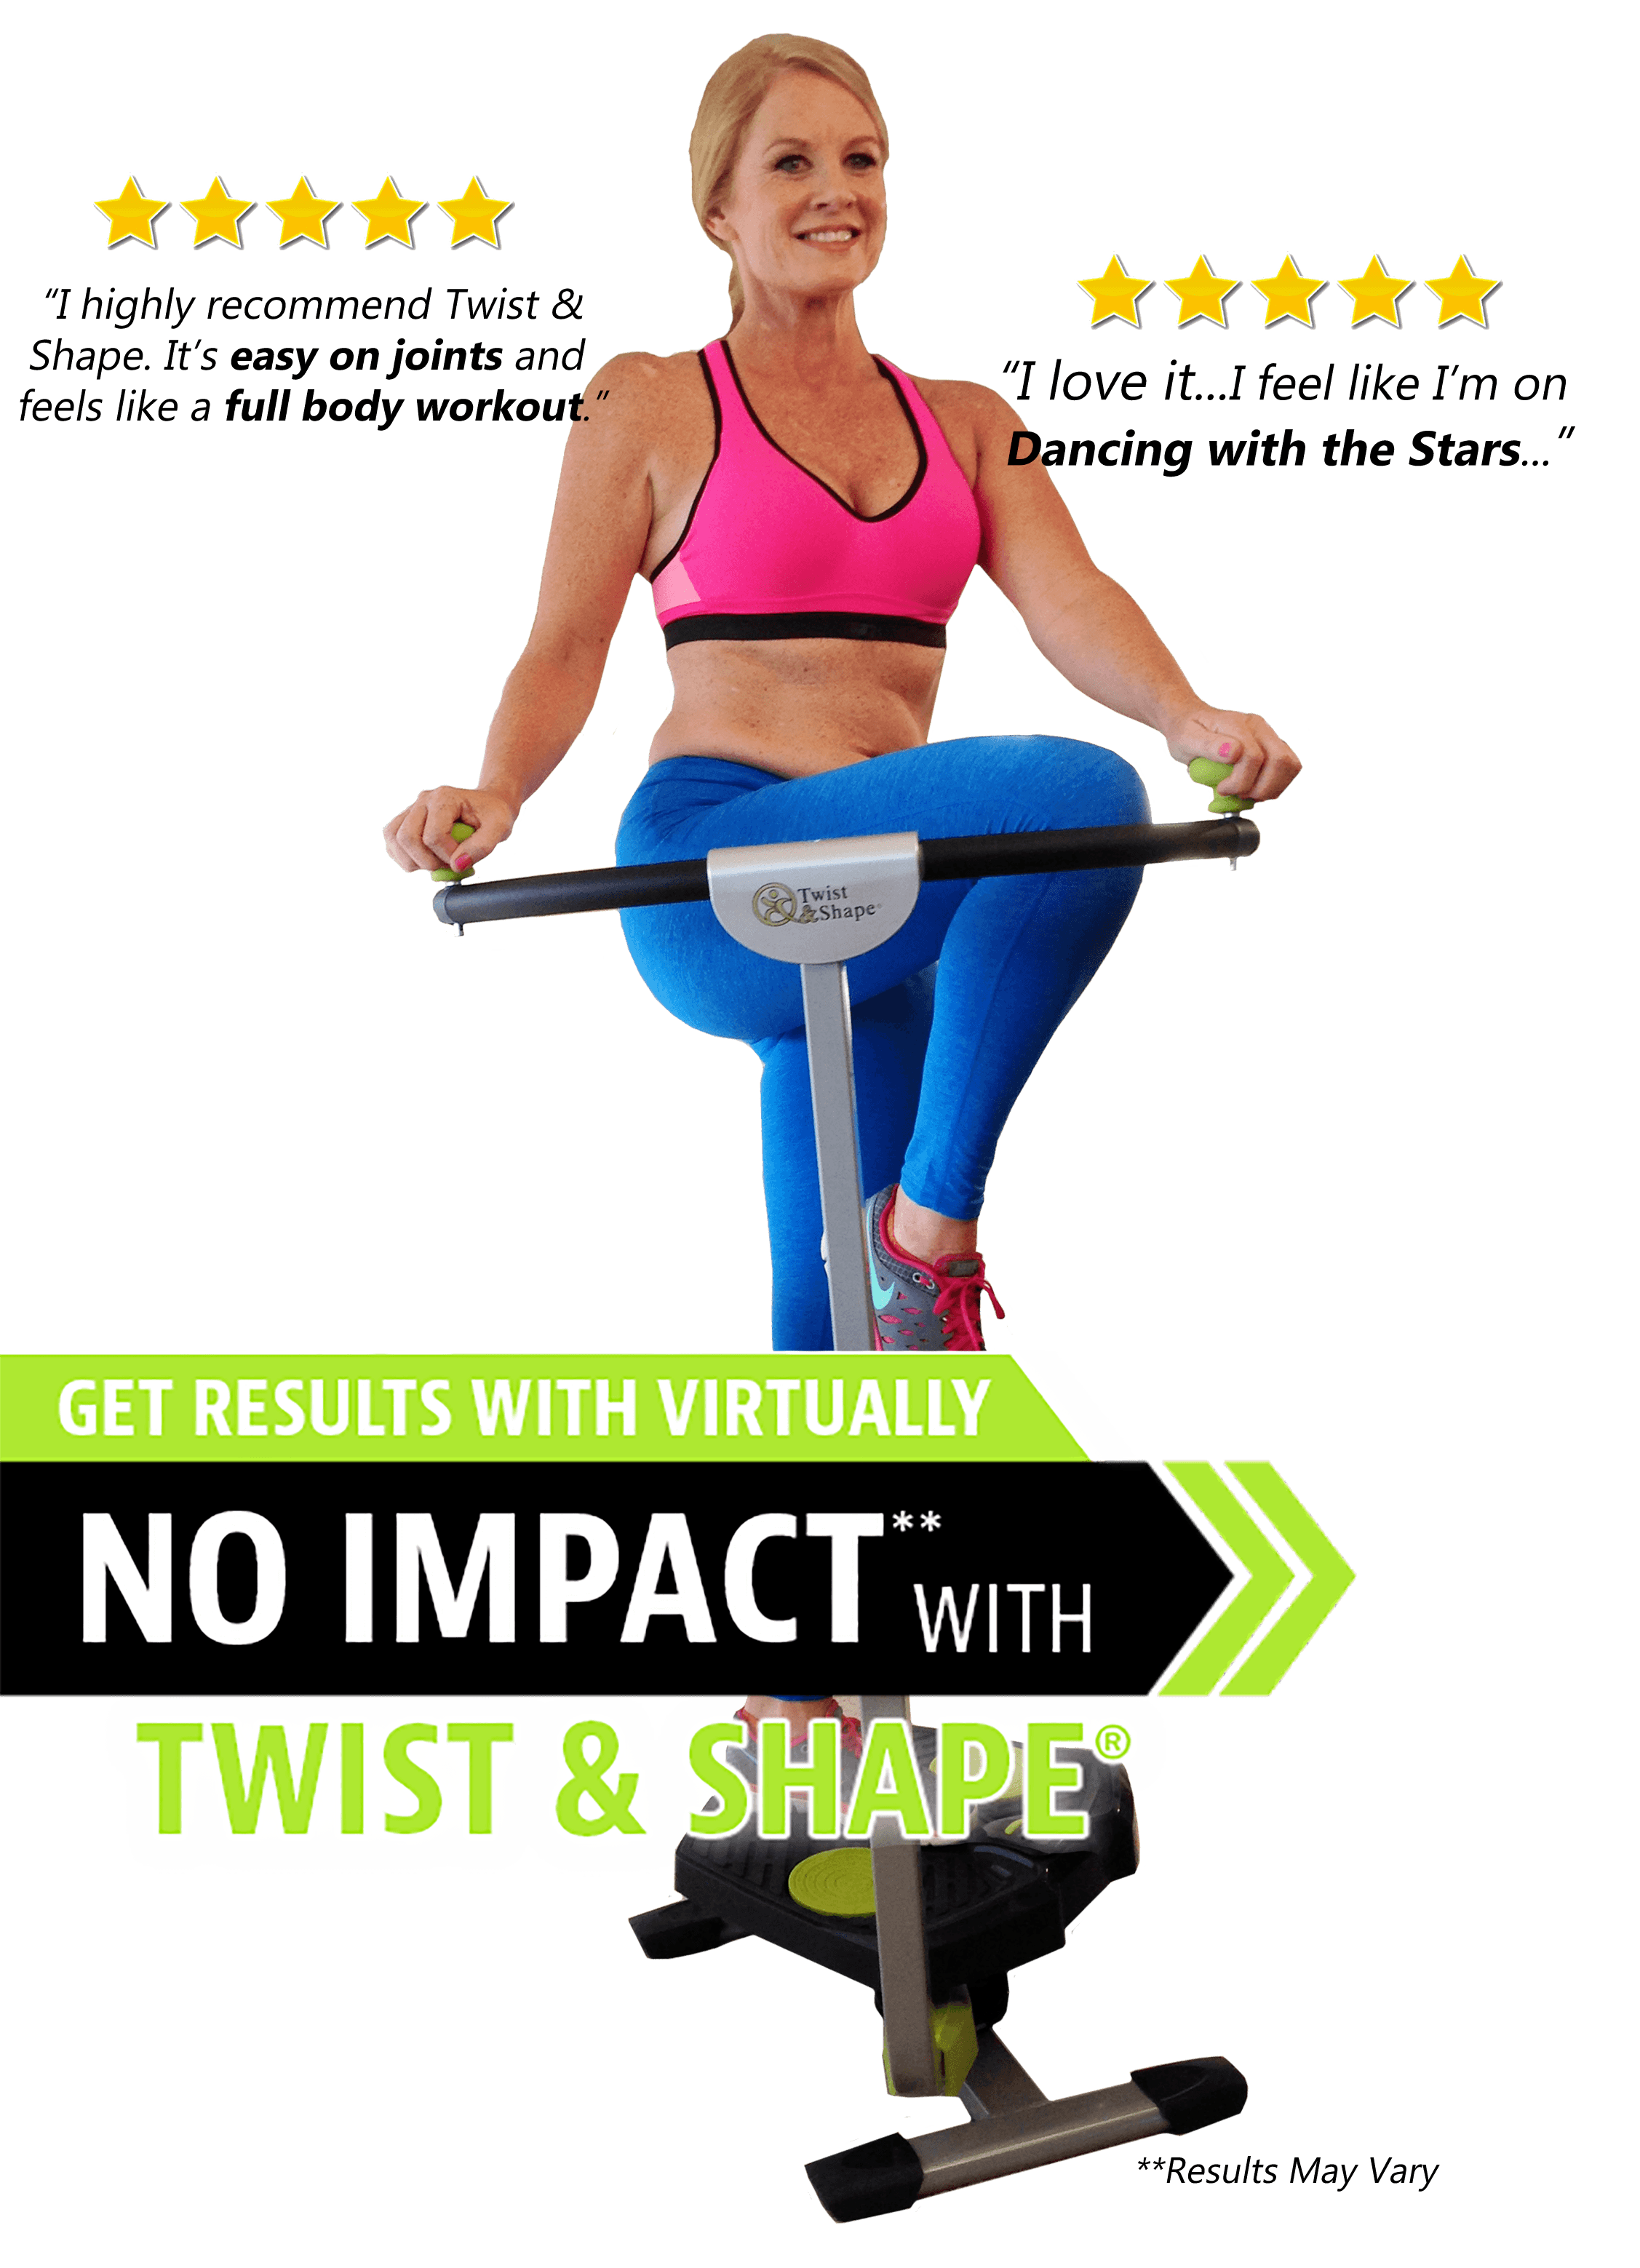 click here for reviews - i highly recommend Twist & Shape. It's easy on joints and feels like a full body workout.